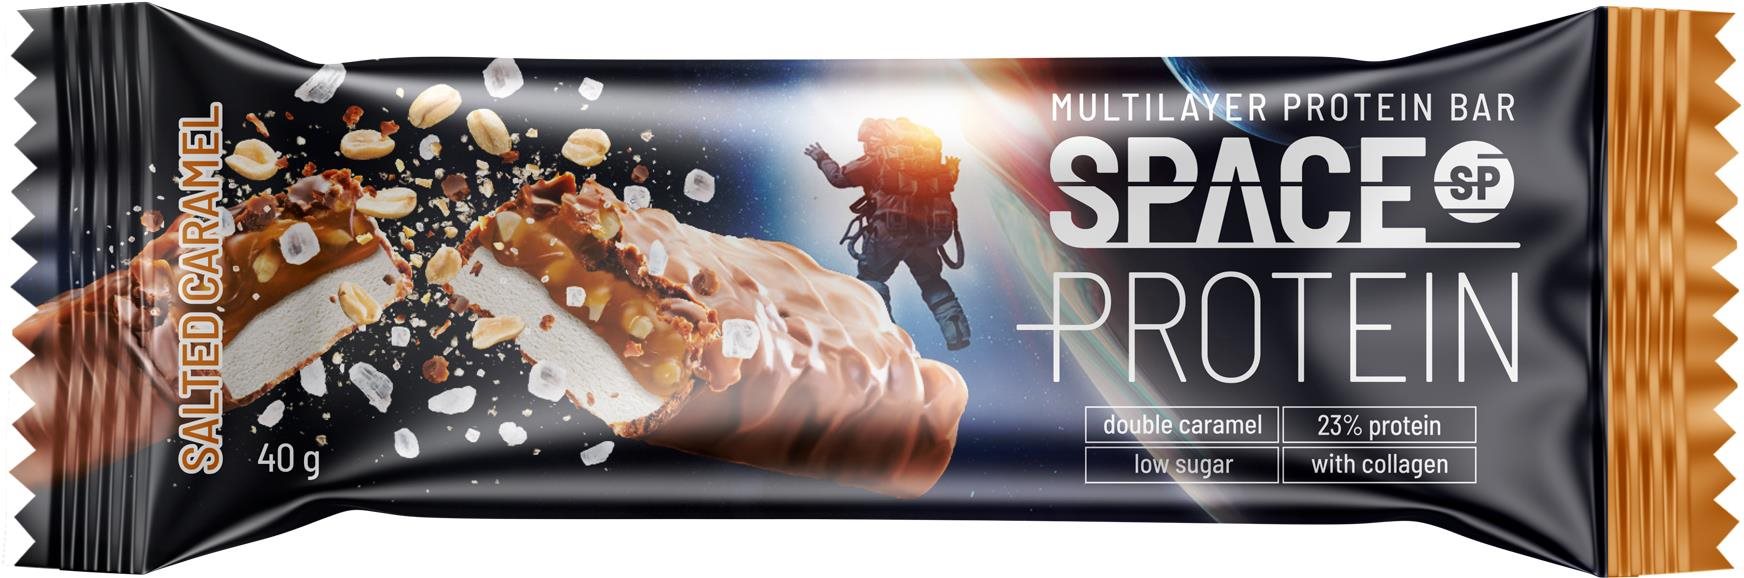 Space Protein MULTILAYER bar 40 g